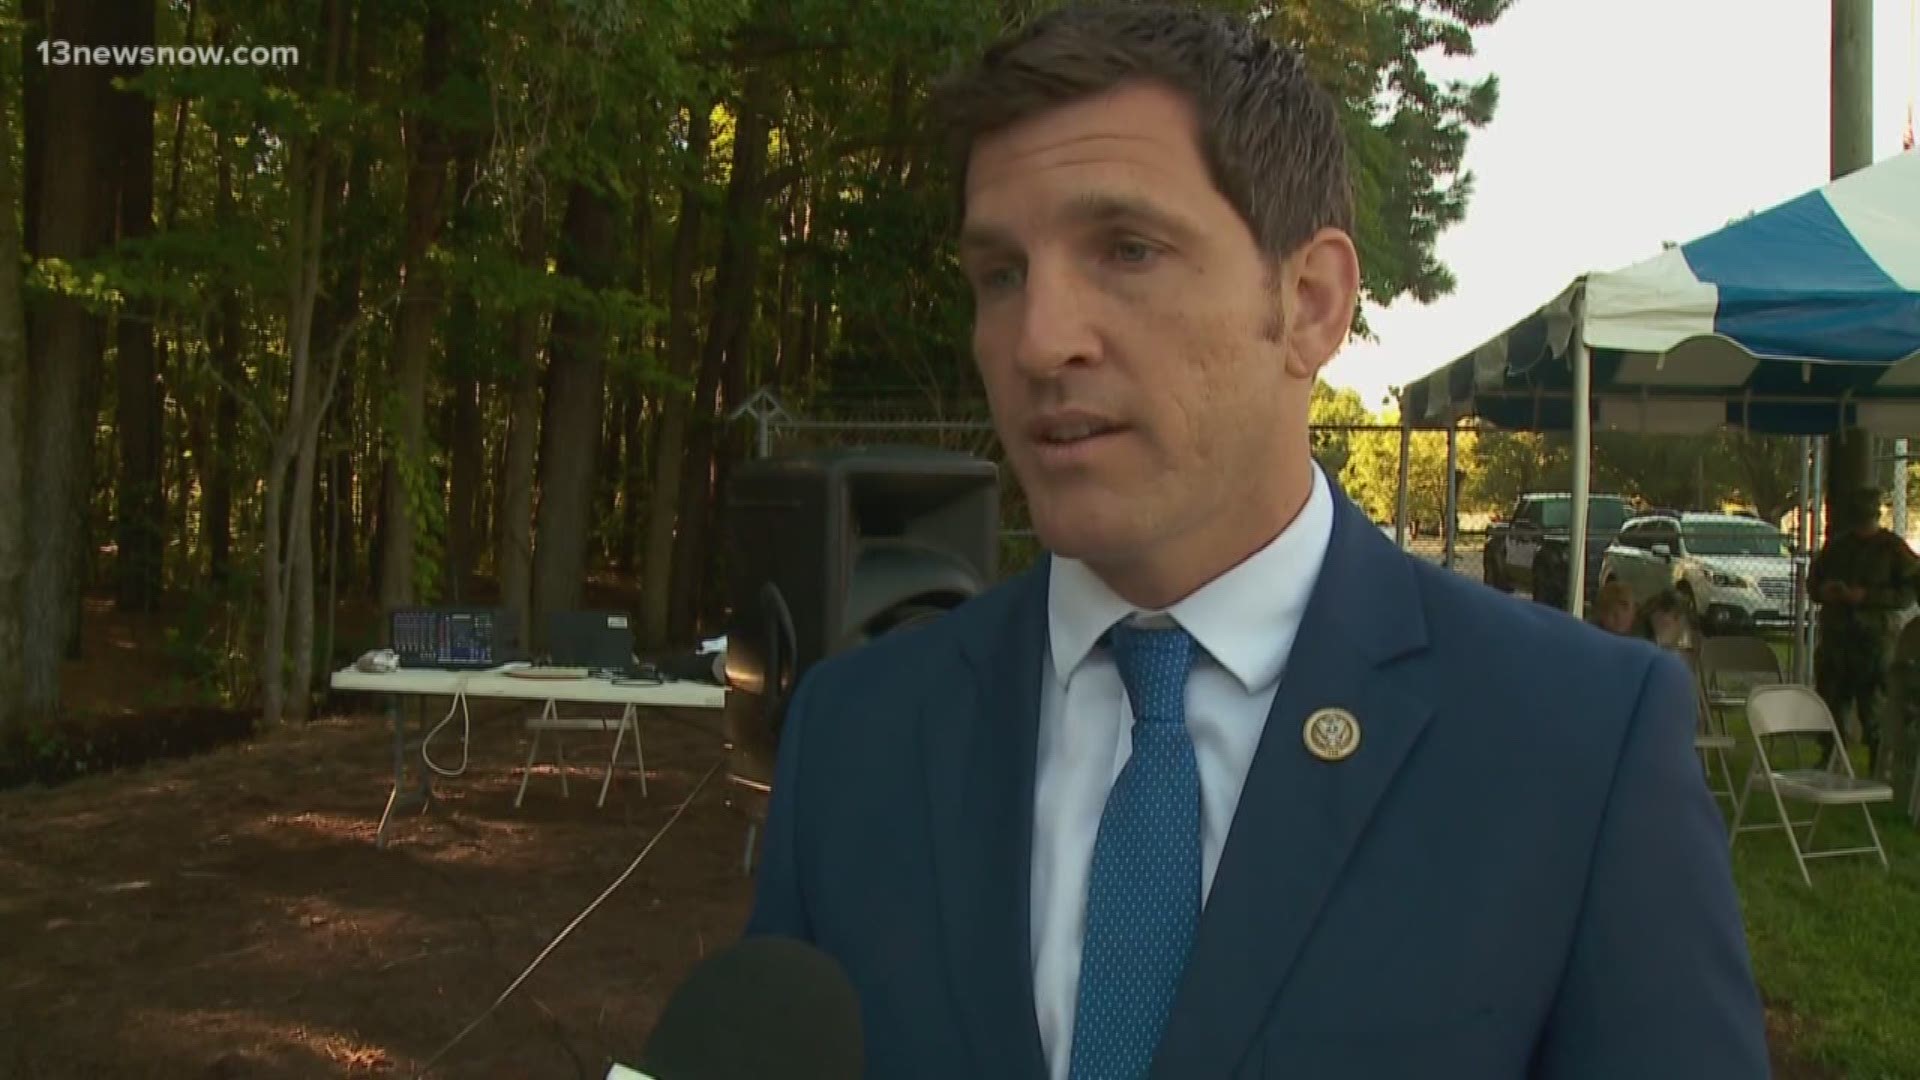 Former Congressman Scott Taylor announced that he would be running against Senator Mark Warner in 2020 for his seat. Taylor believes he can get more done than Warner has in the last 12 years.